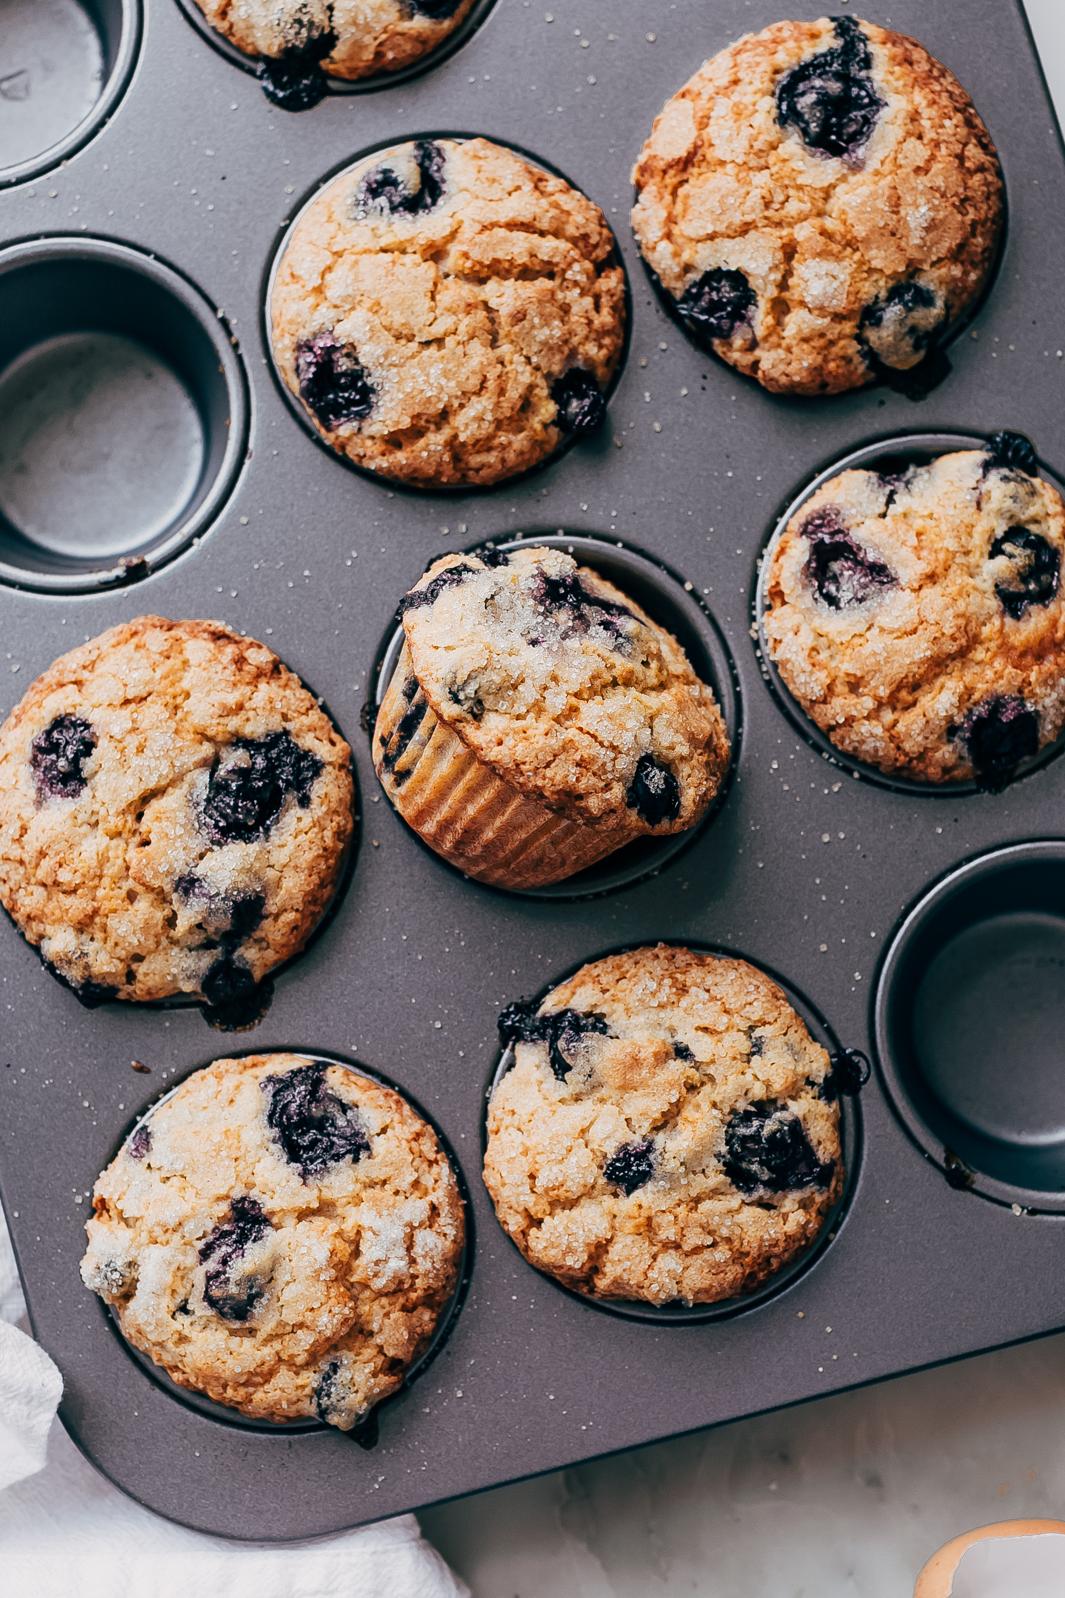  You won't miss the gluten with this perfectly moist muffin mix.